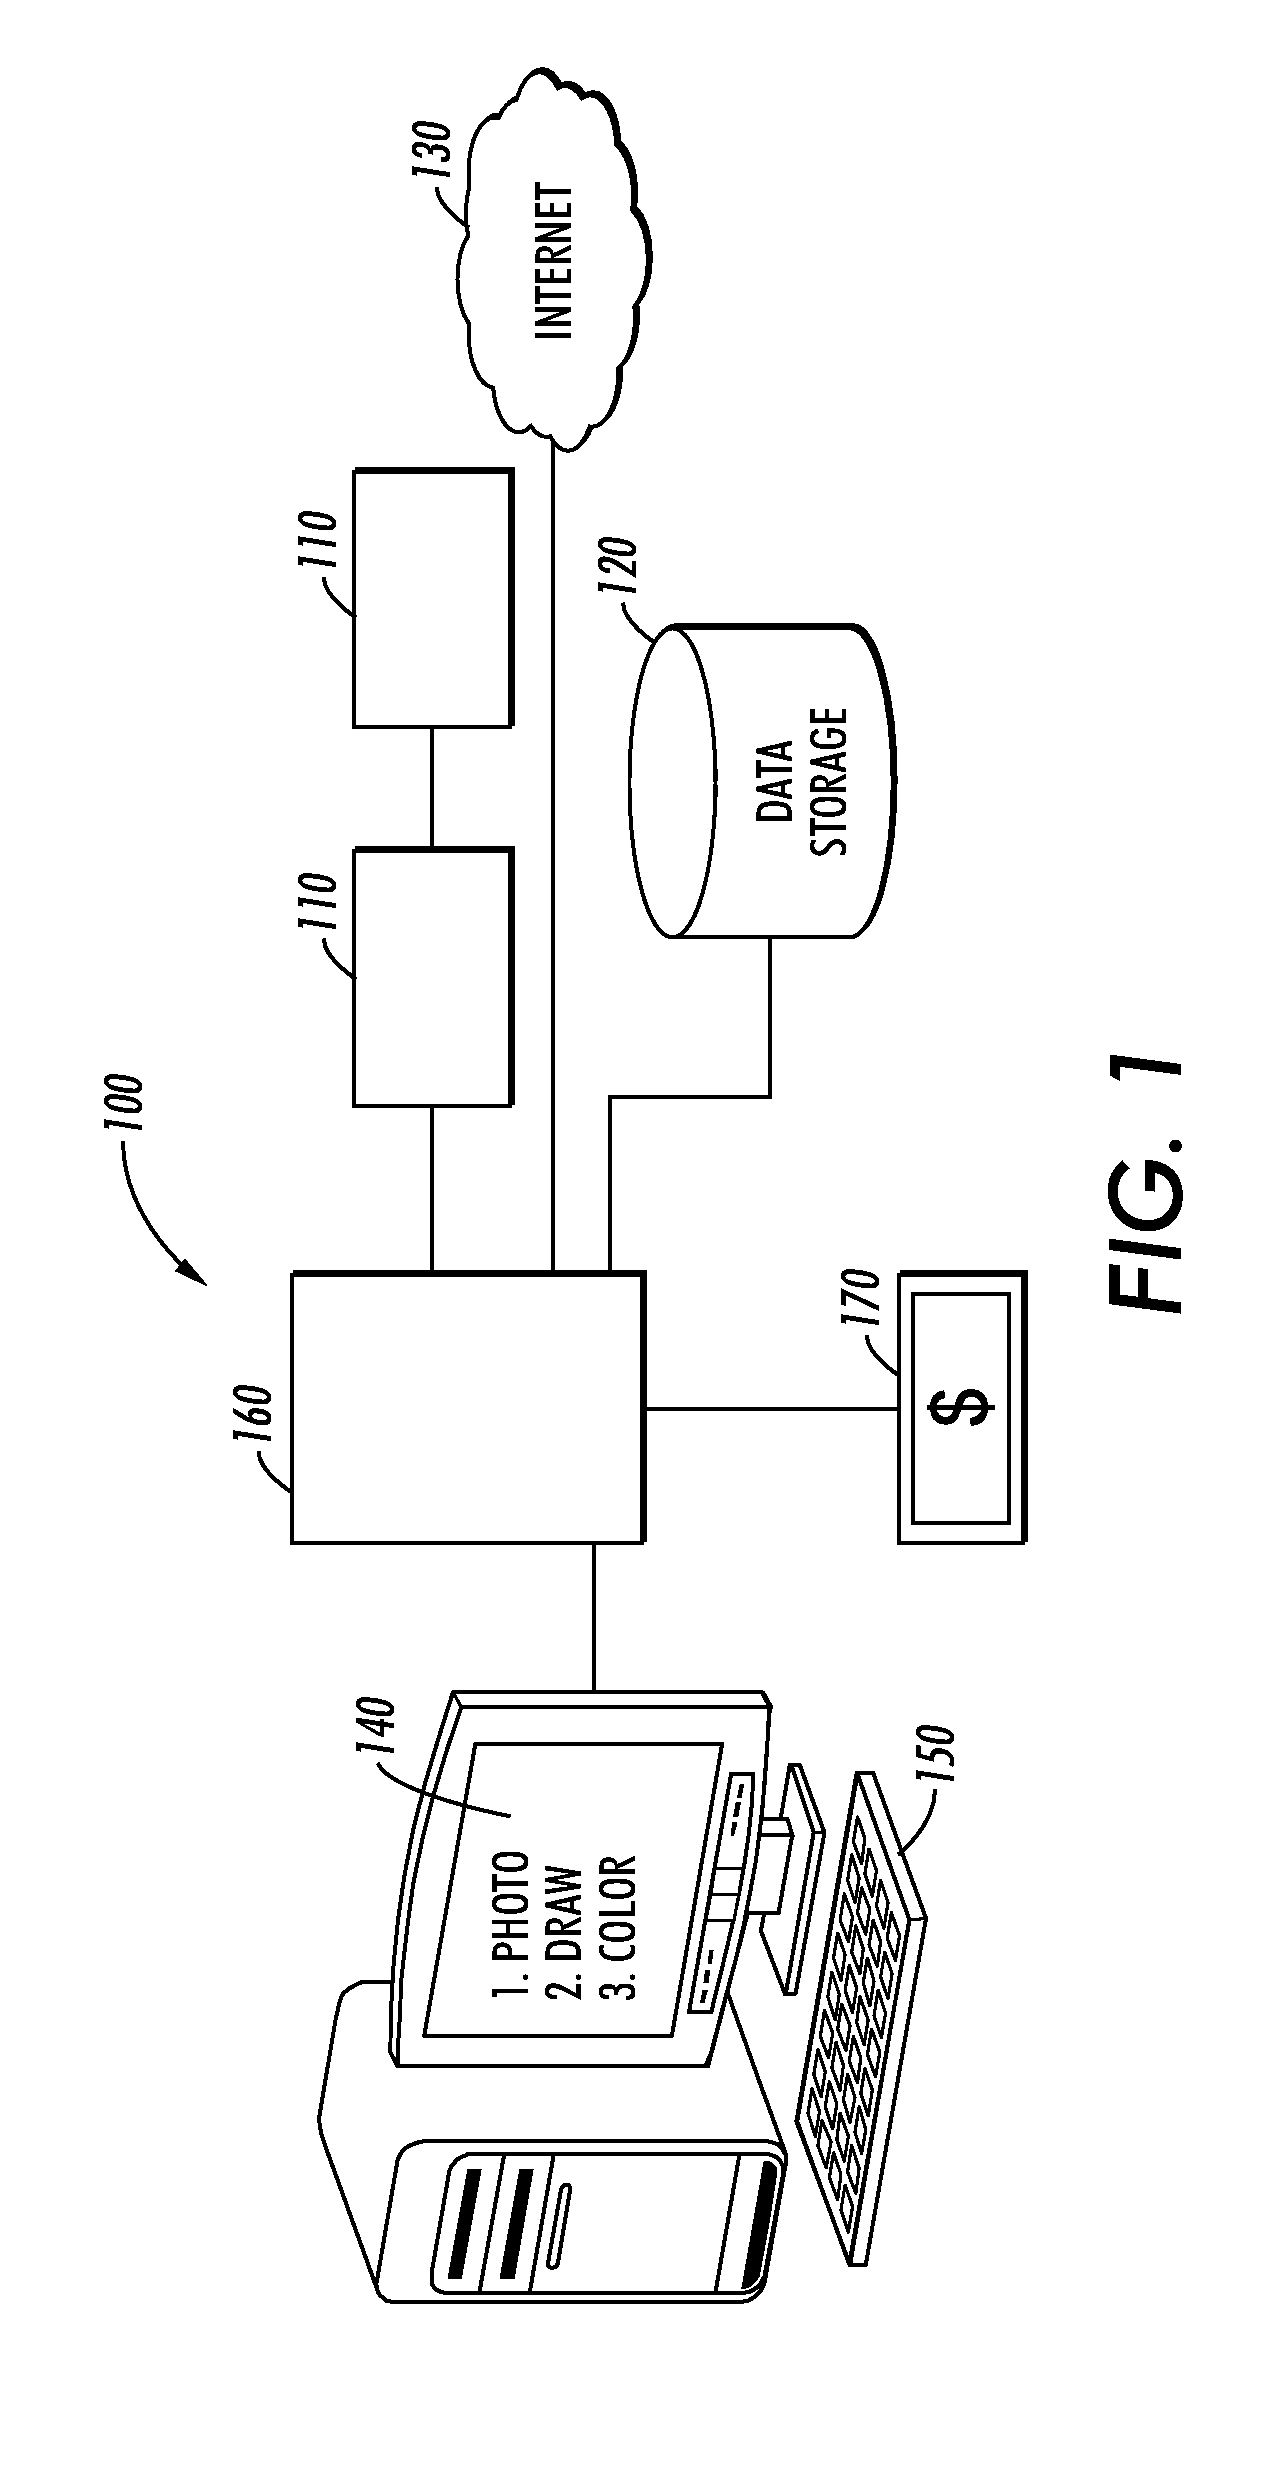 Web enabled color management service system and method